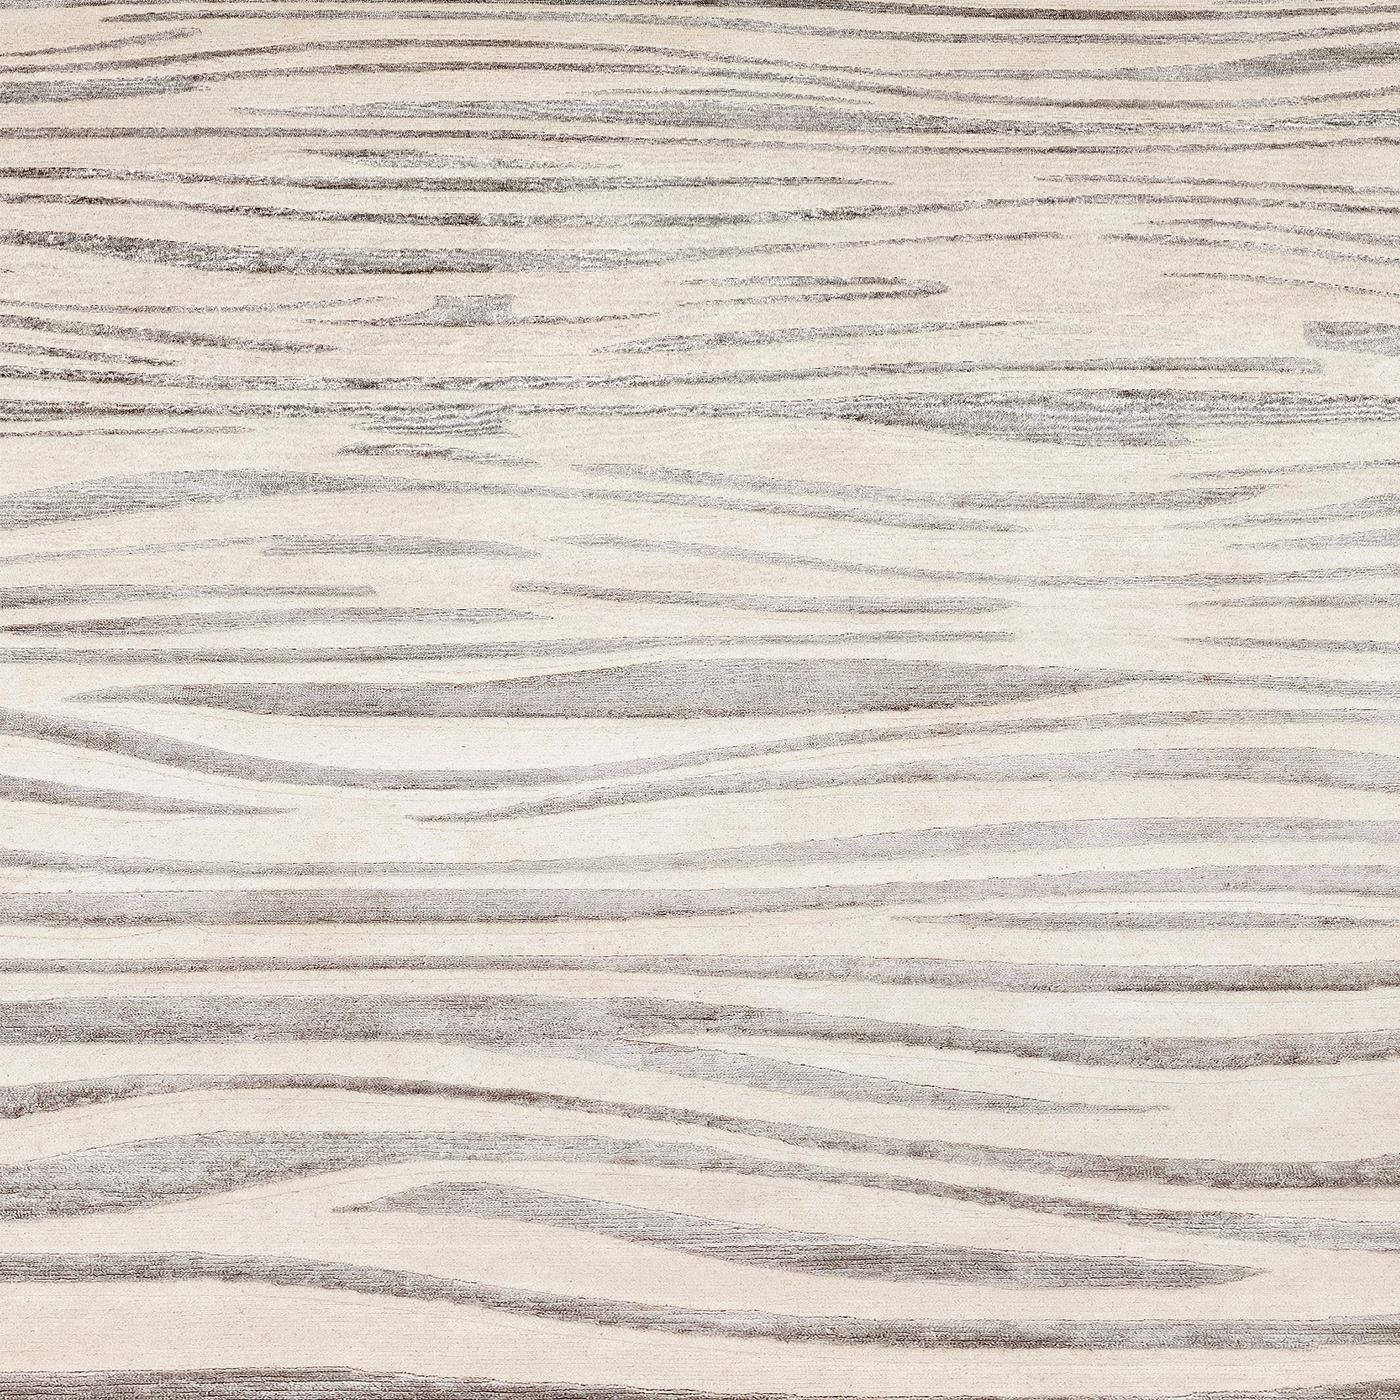 This exquisite rug depicts an alluring motif of sinuous stripes, whose irregular shape reminds of dangerous yet seductive flames. Part of a series of unique pieces hand-knotted in Nepal of 50% silk and 50% Himalayan wool, it features a base that is